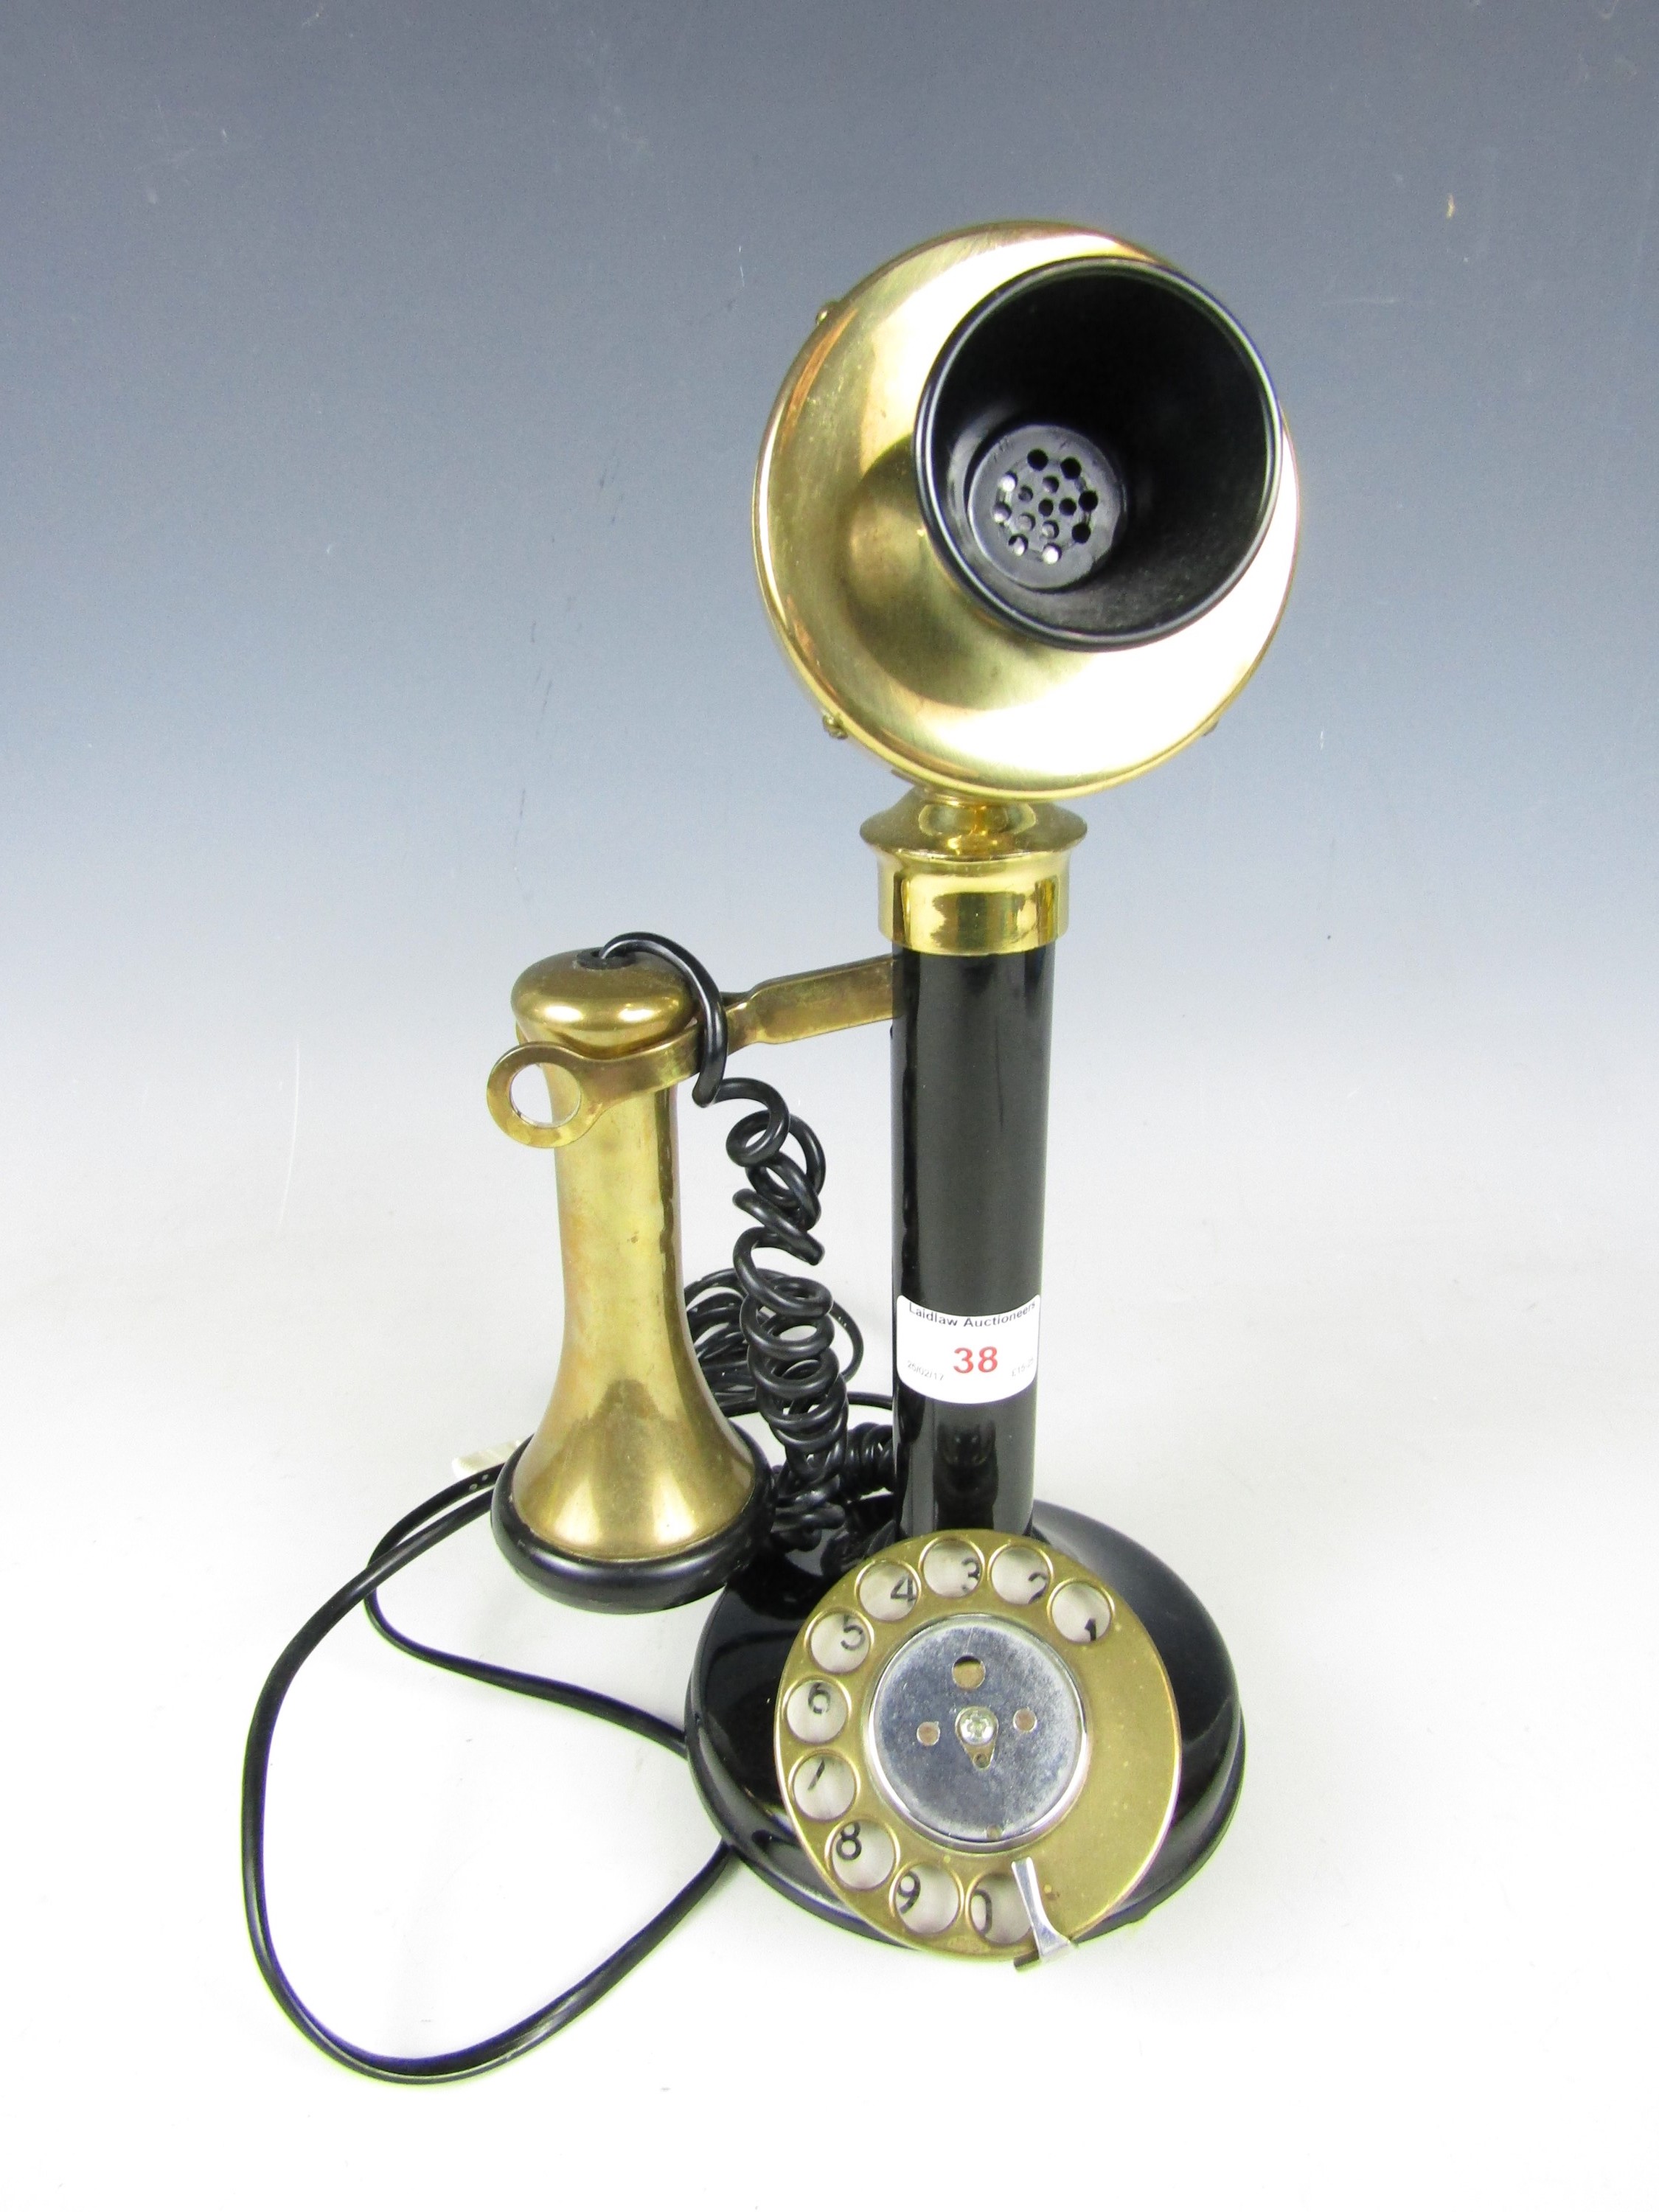 A reproduction candlestick telephone